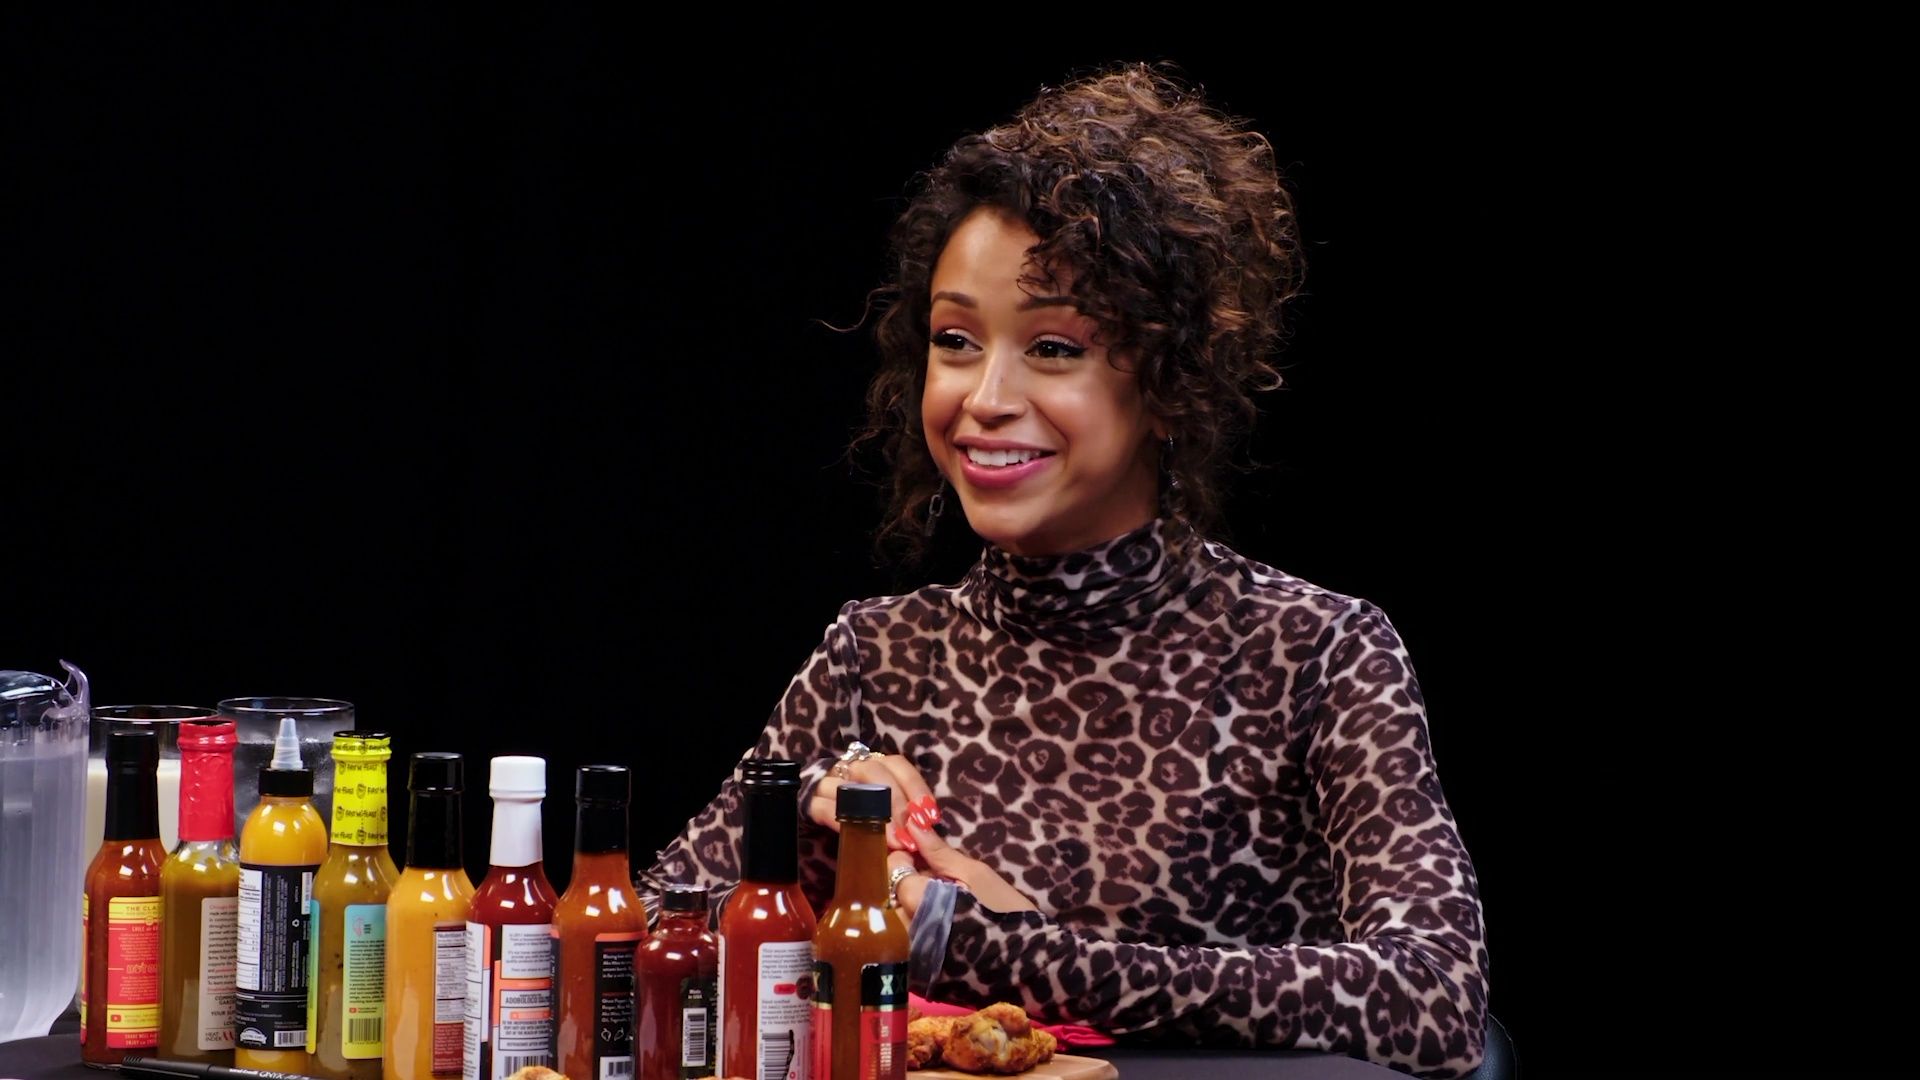 Liza Koshy Meets Her Future Self While Eating Spicy Wings